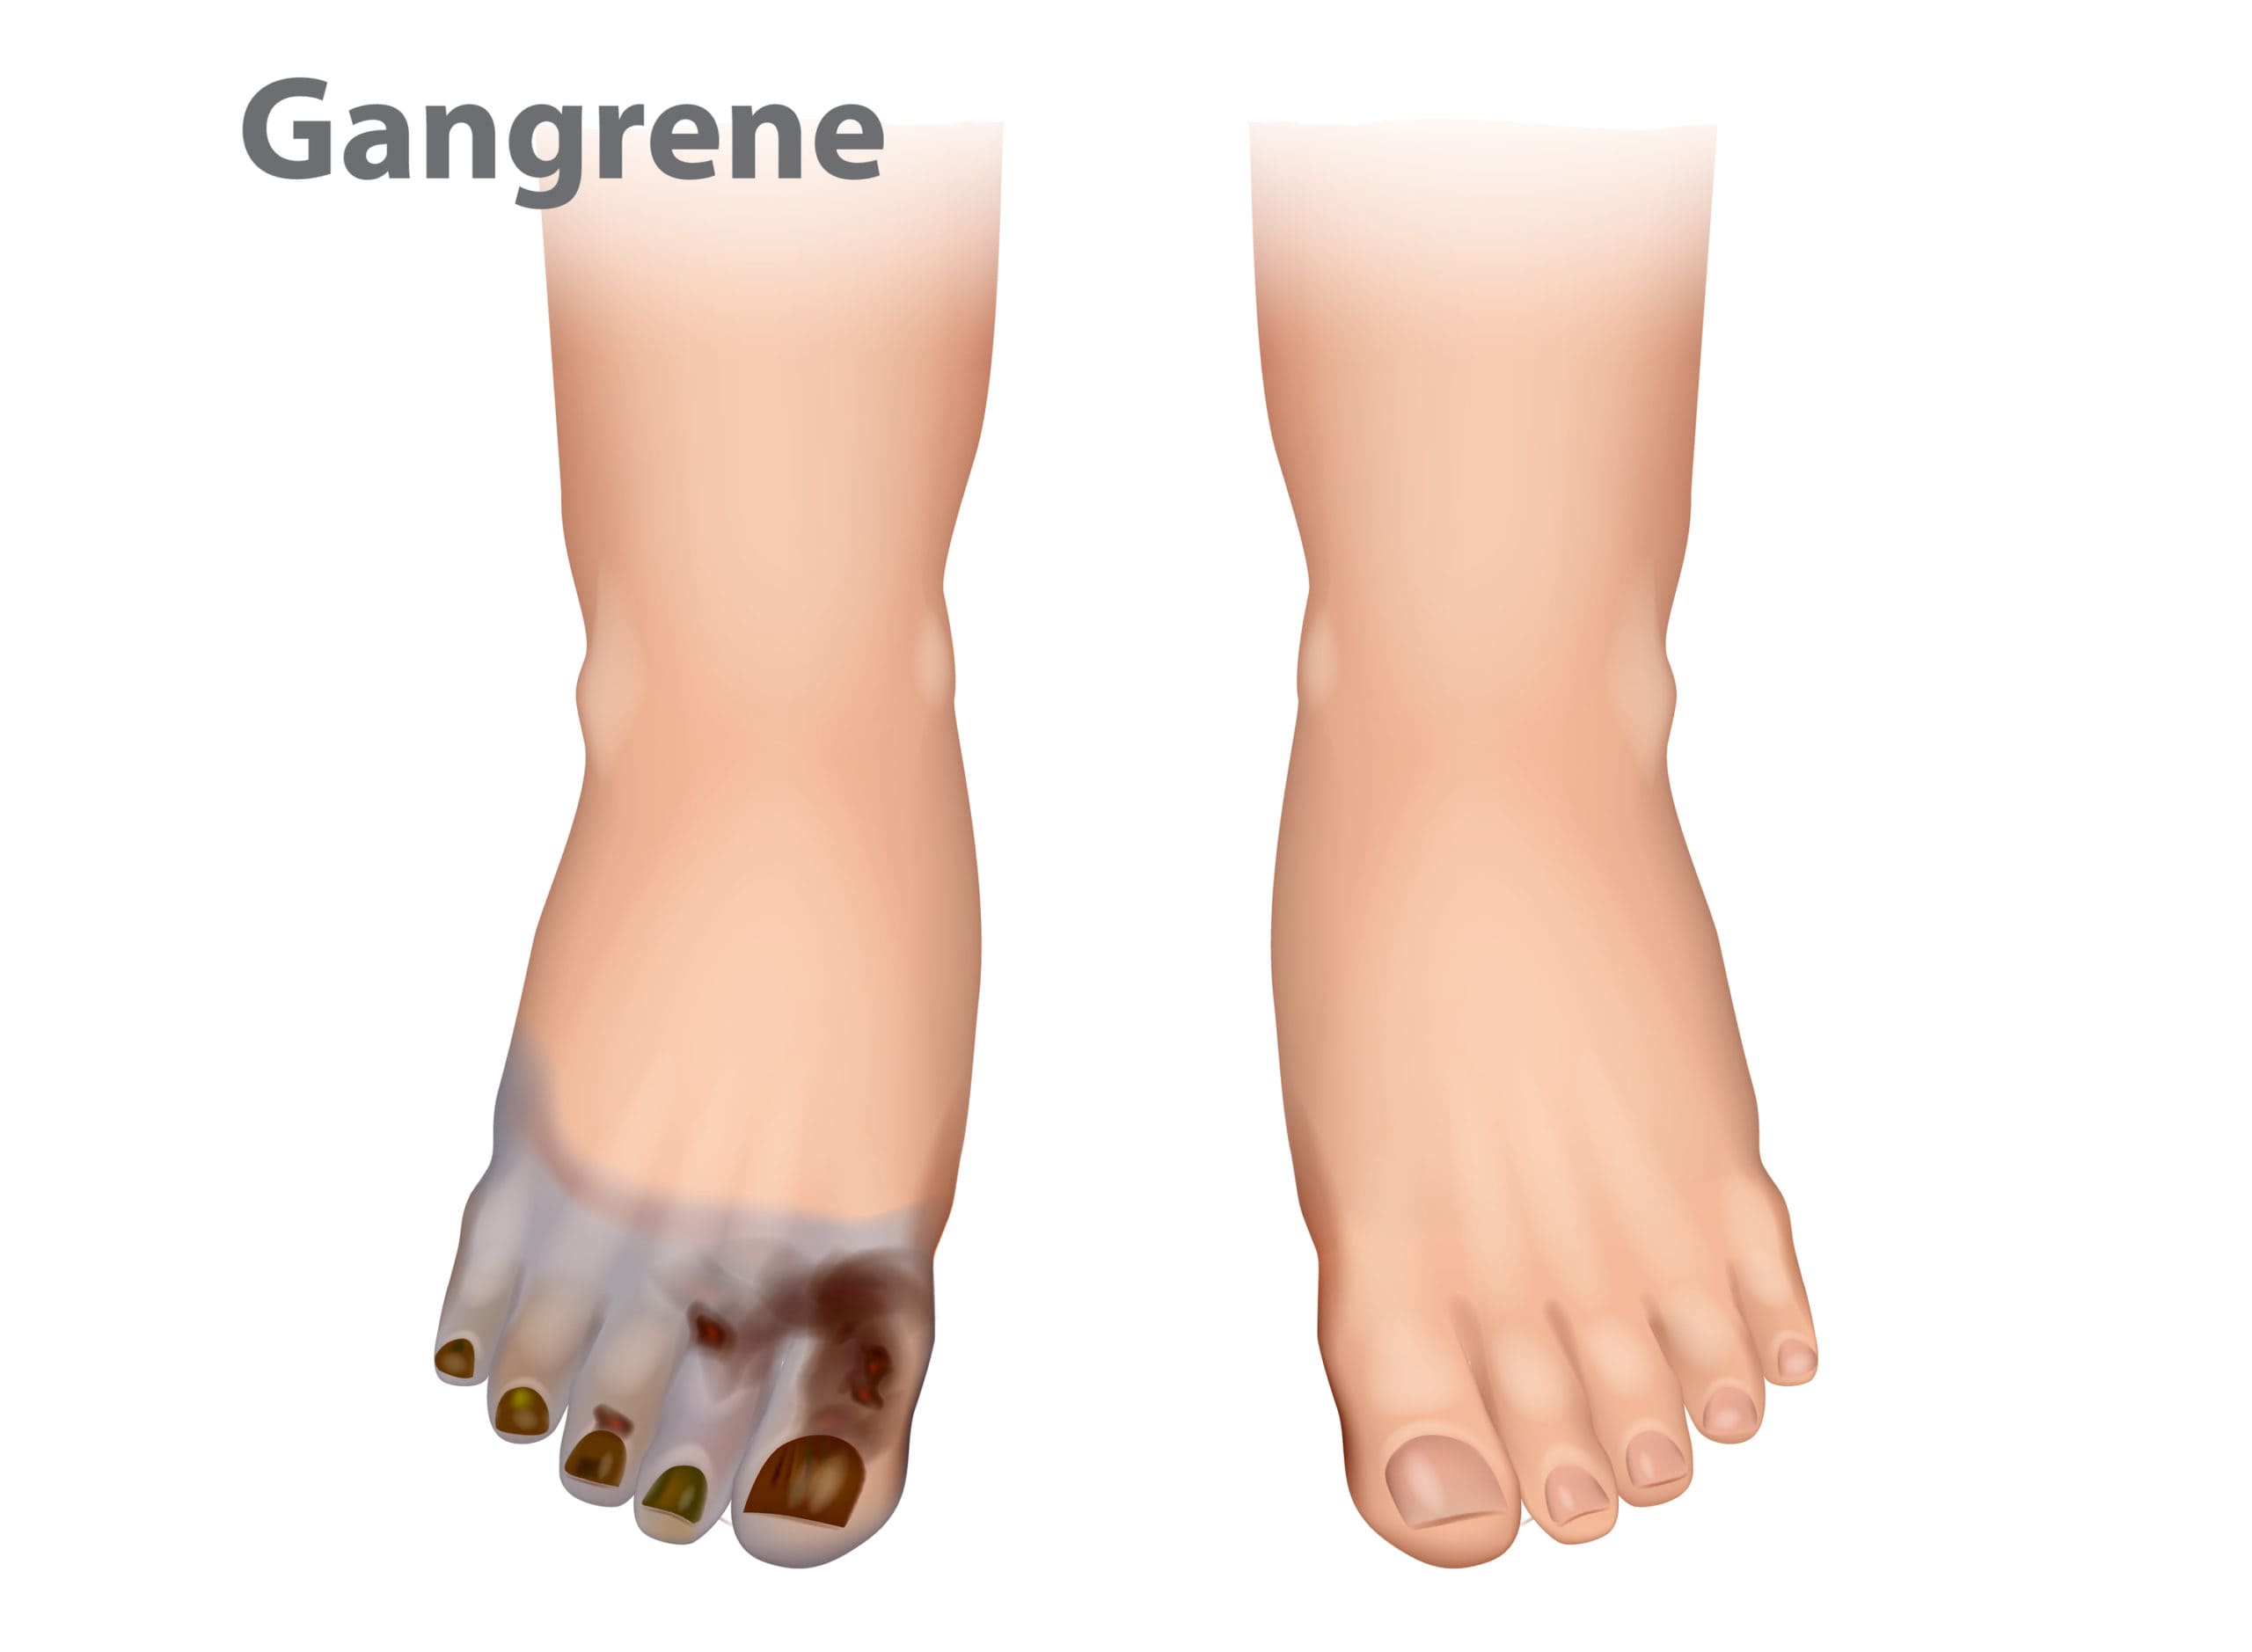 Cure For Gangrene - How To Improve Your Chances For Recovery